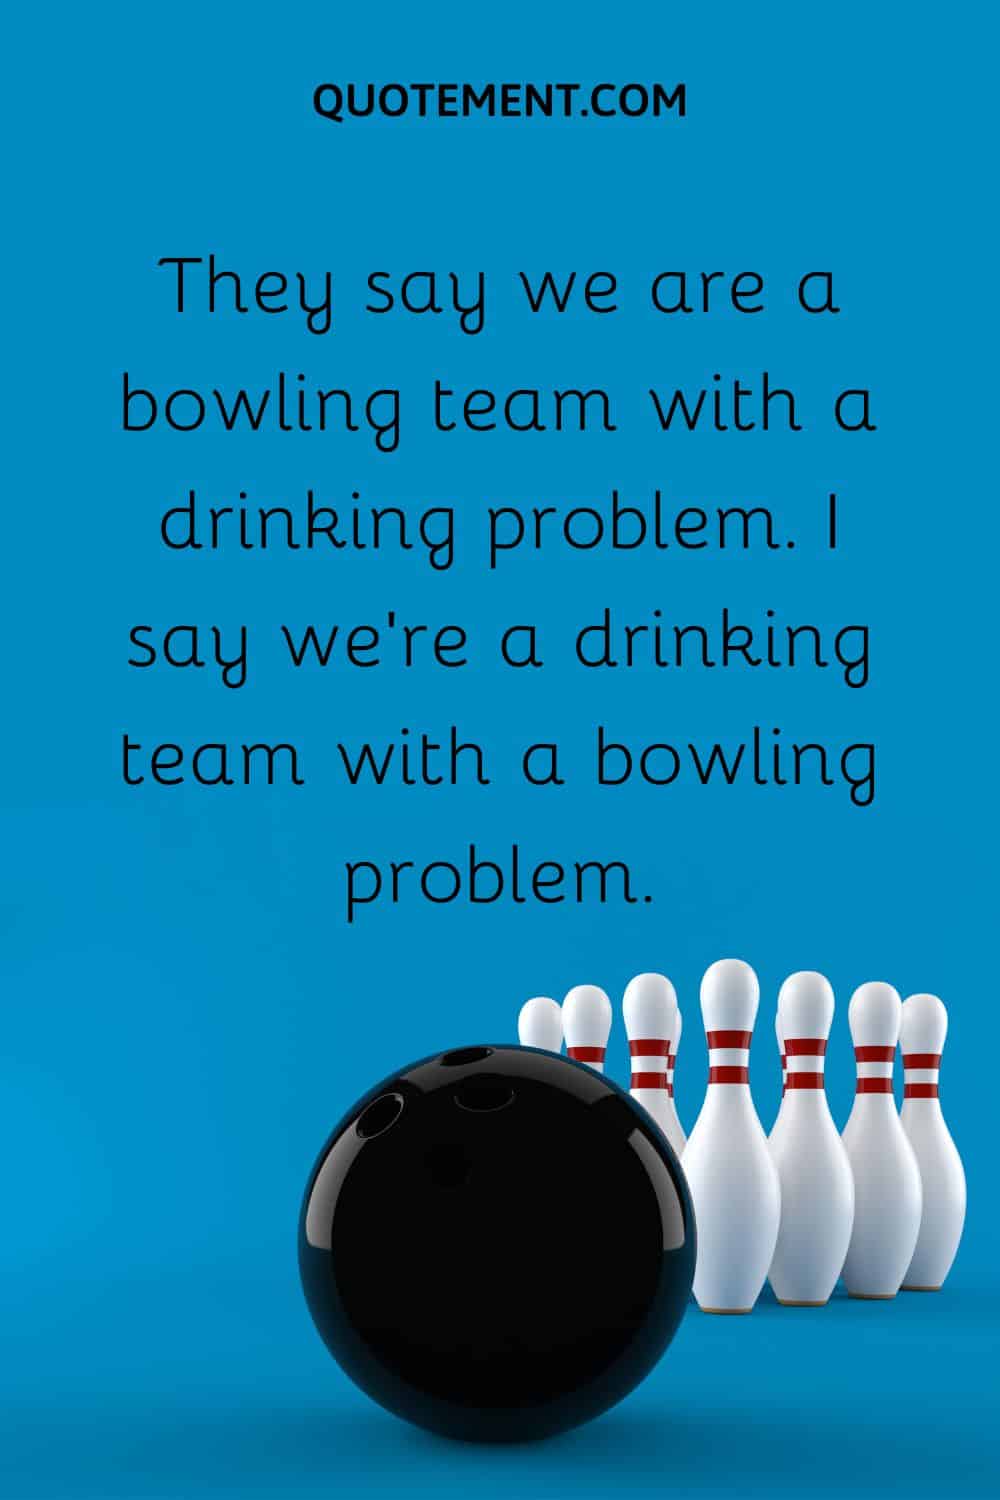 They say we are a bowling team with a drinking problem